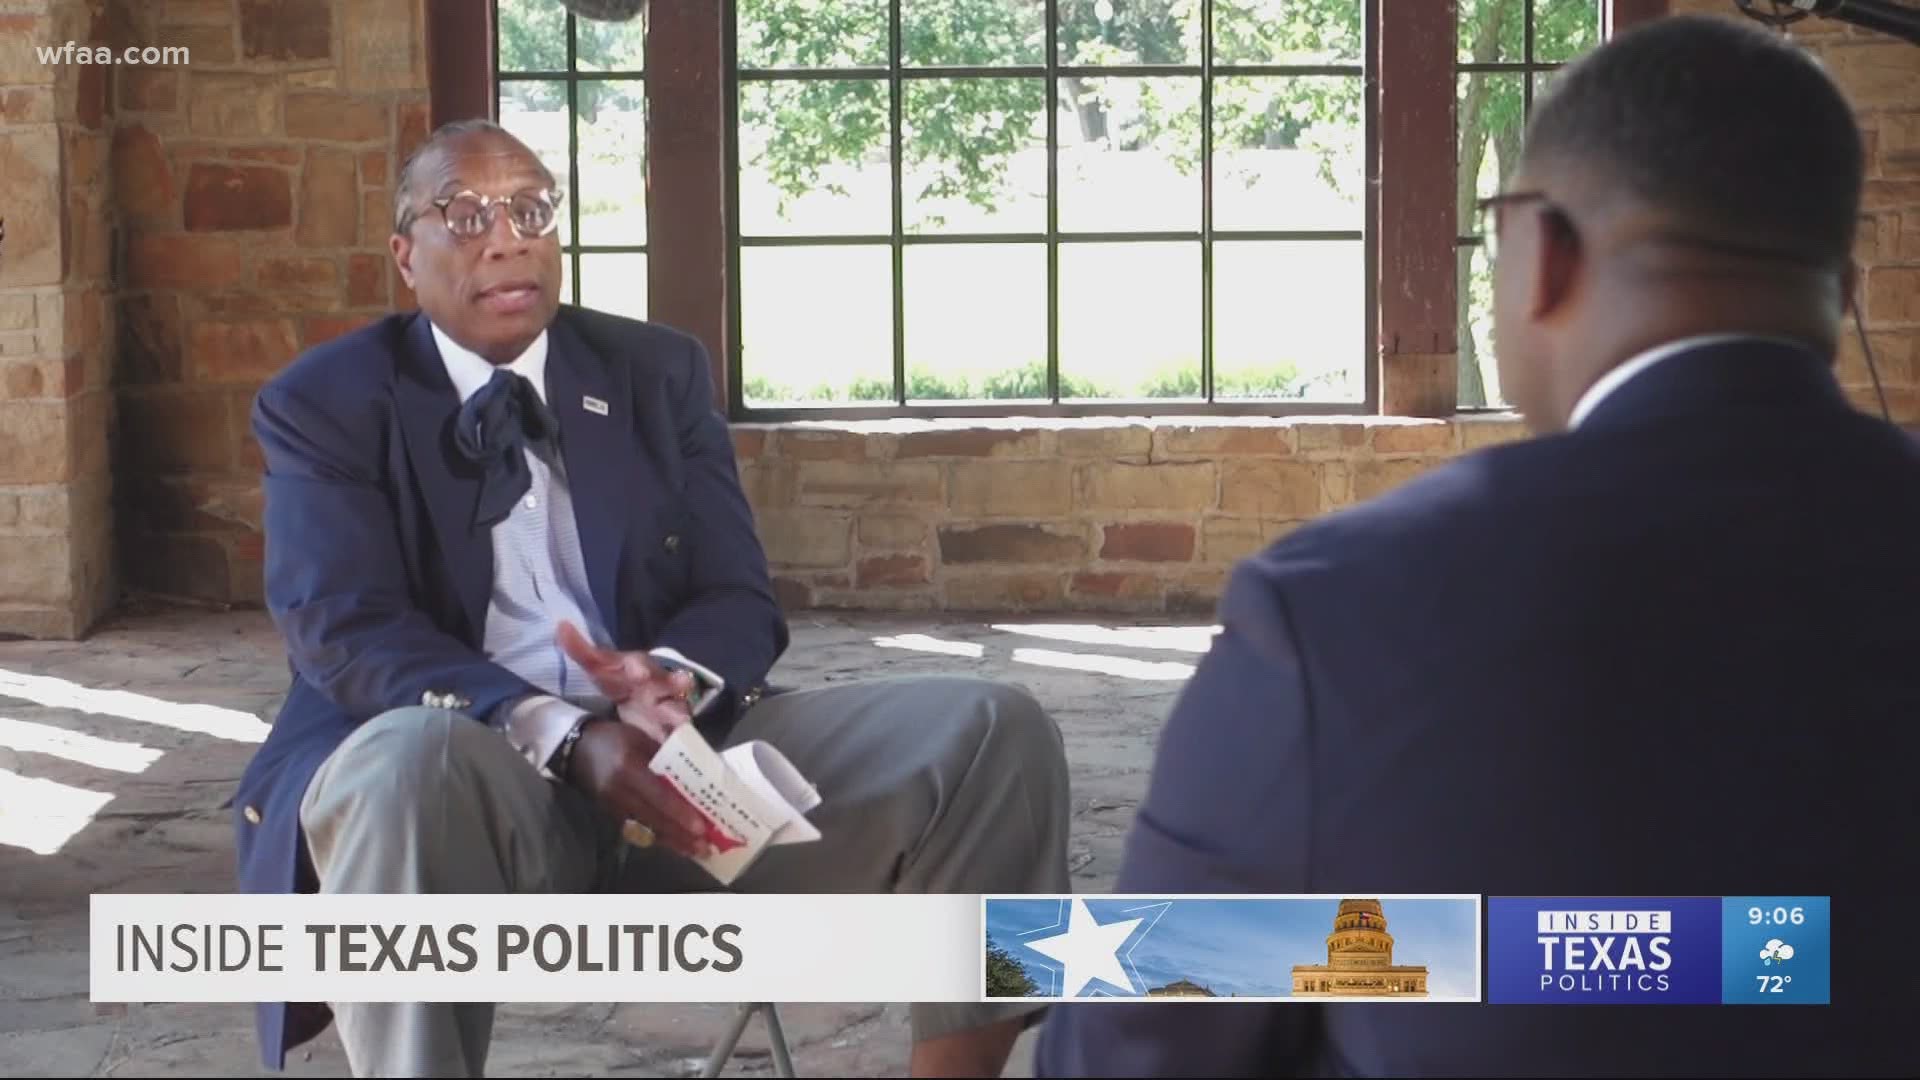 John Wiley Price has been a fixture in Dallas County politics since the 1980s. He has avoided interviews for years, but he agreed to one with Inside Texas Politics.